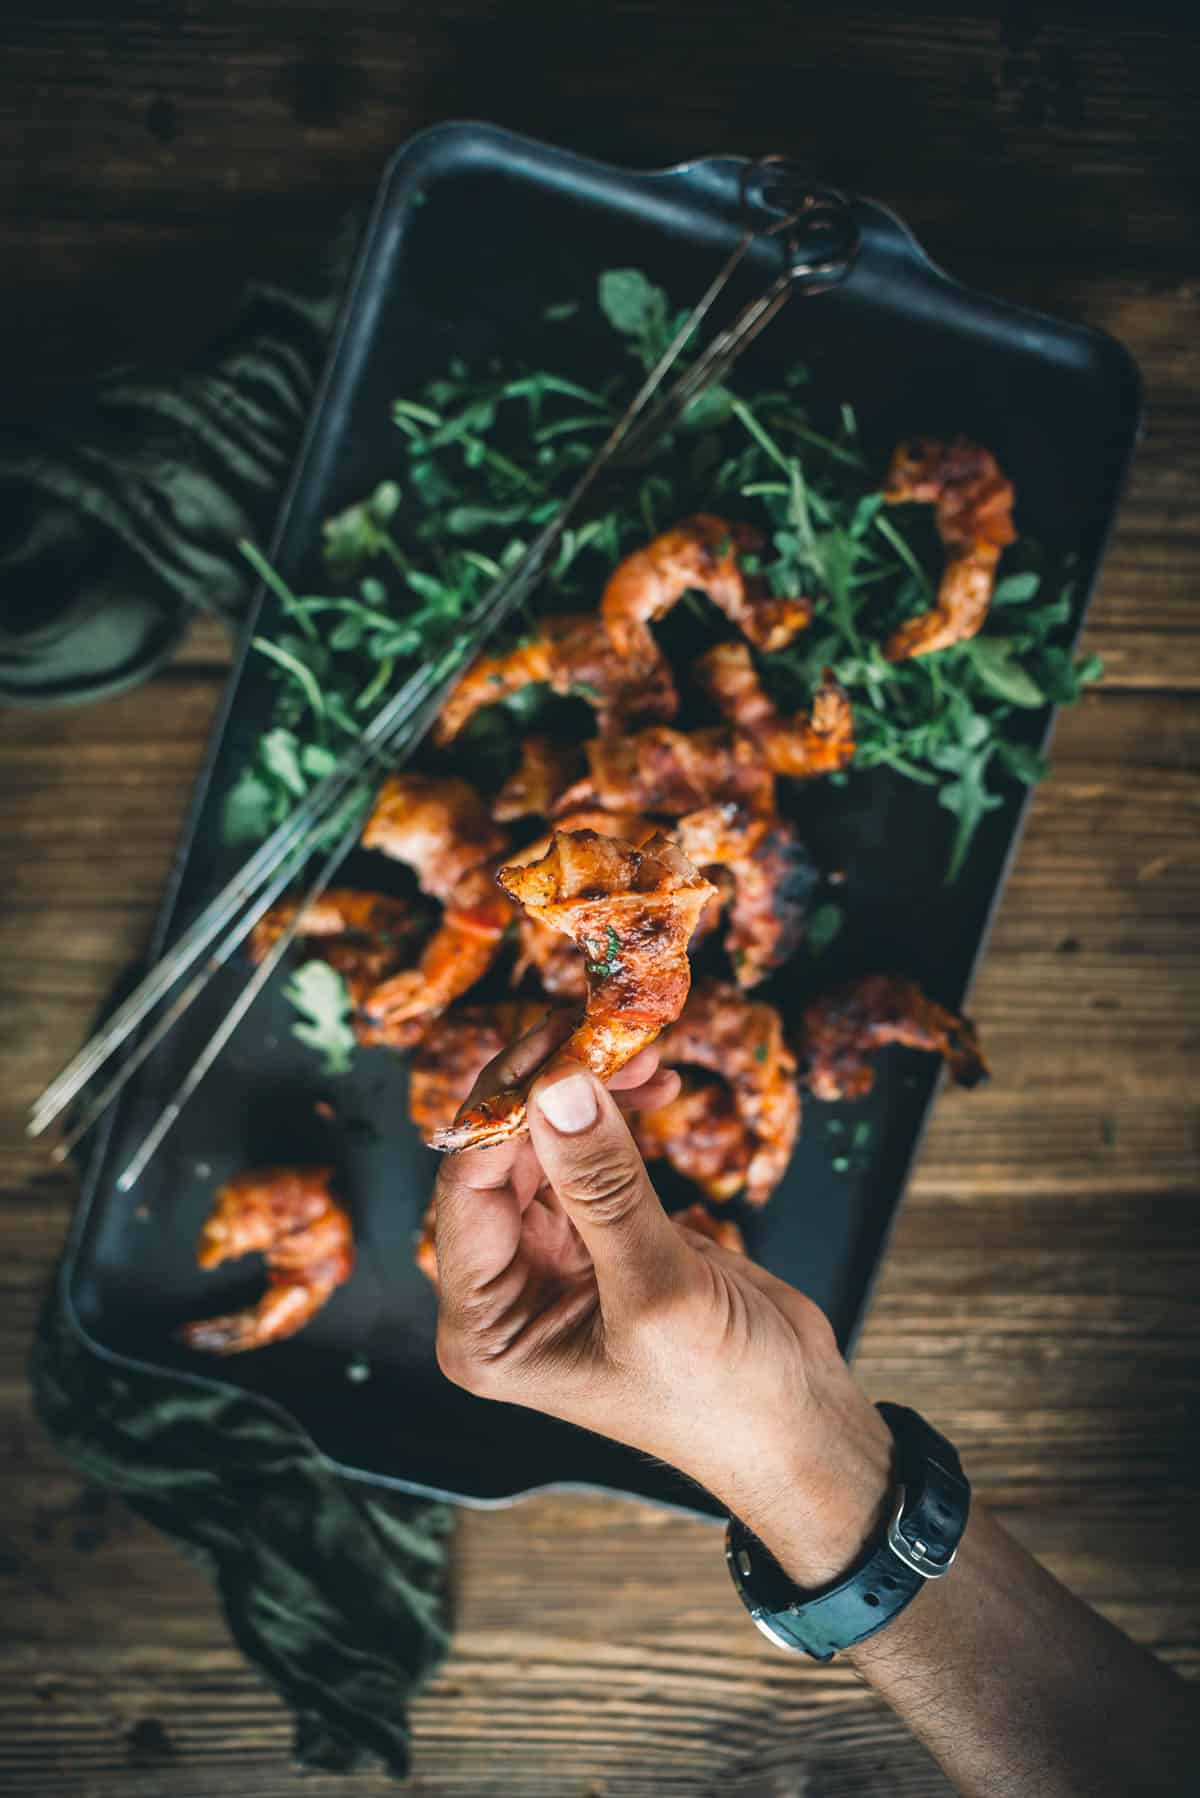 A person's hand holding a piece of grilled shrimp wrapped in bacon over a tray filled with more shrimp and greens on a wooden table.